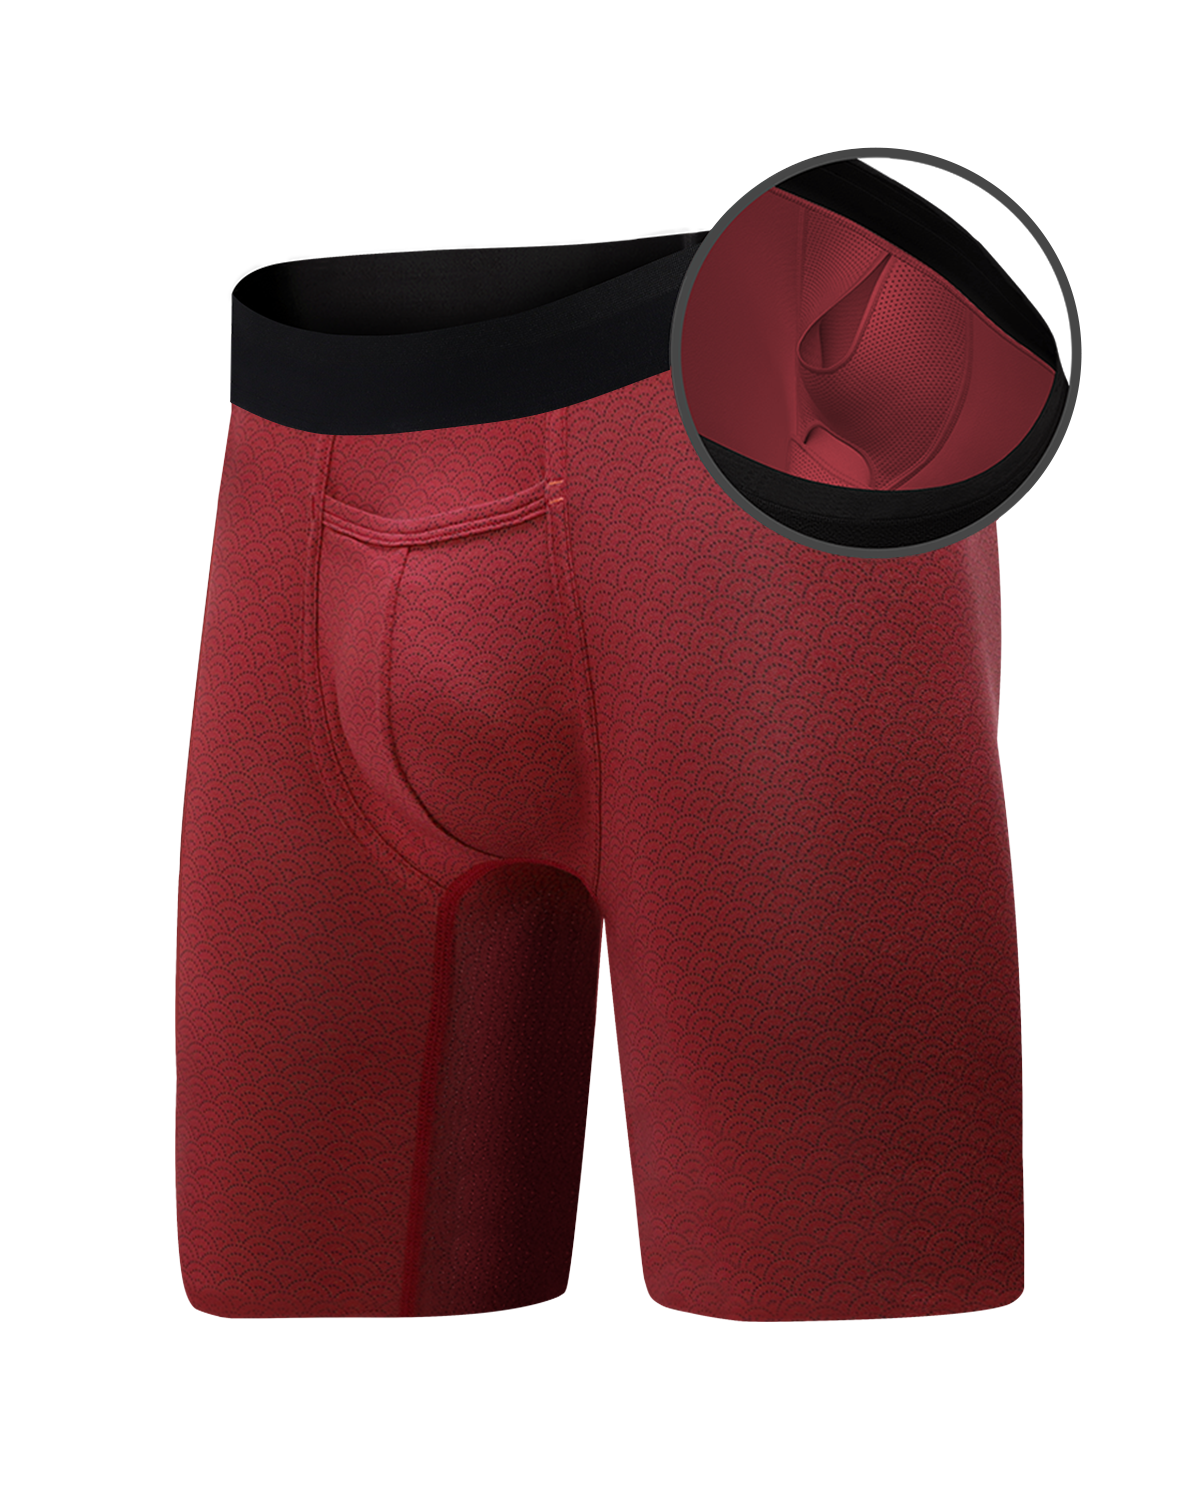 Paradise Pocket Ball Pouch Underwear – Long Boxer Brief